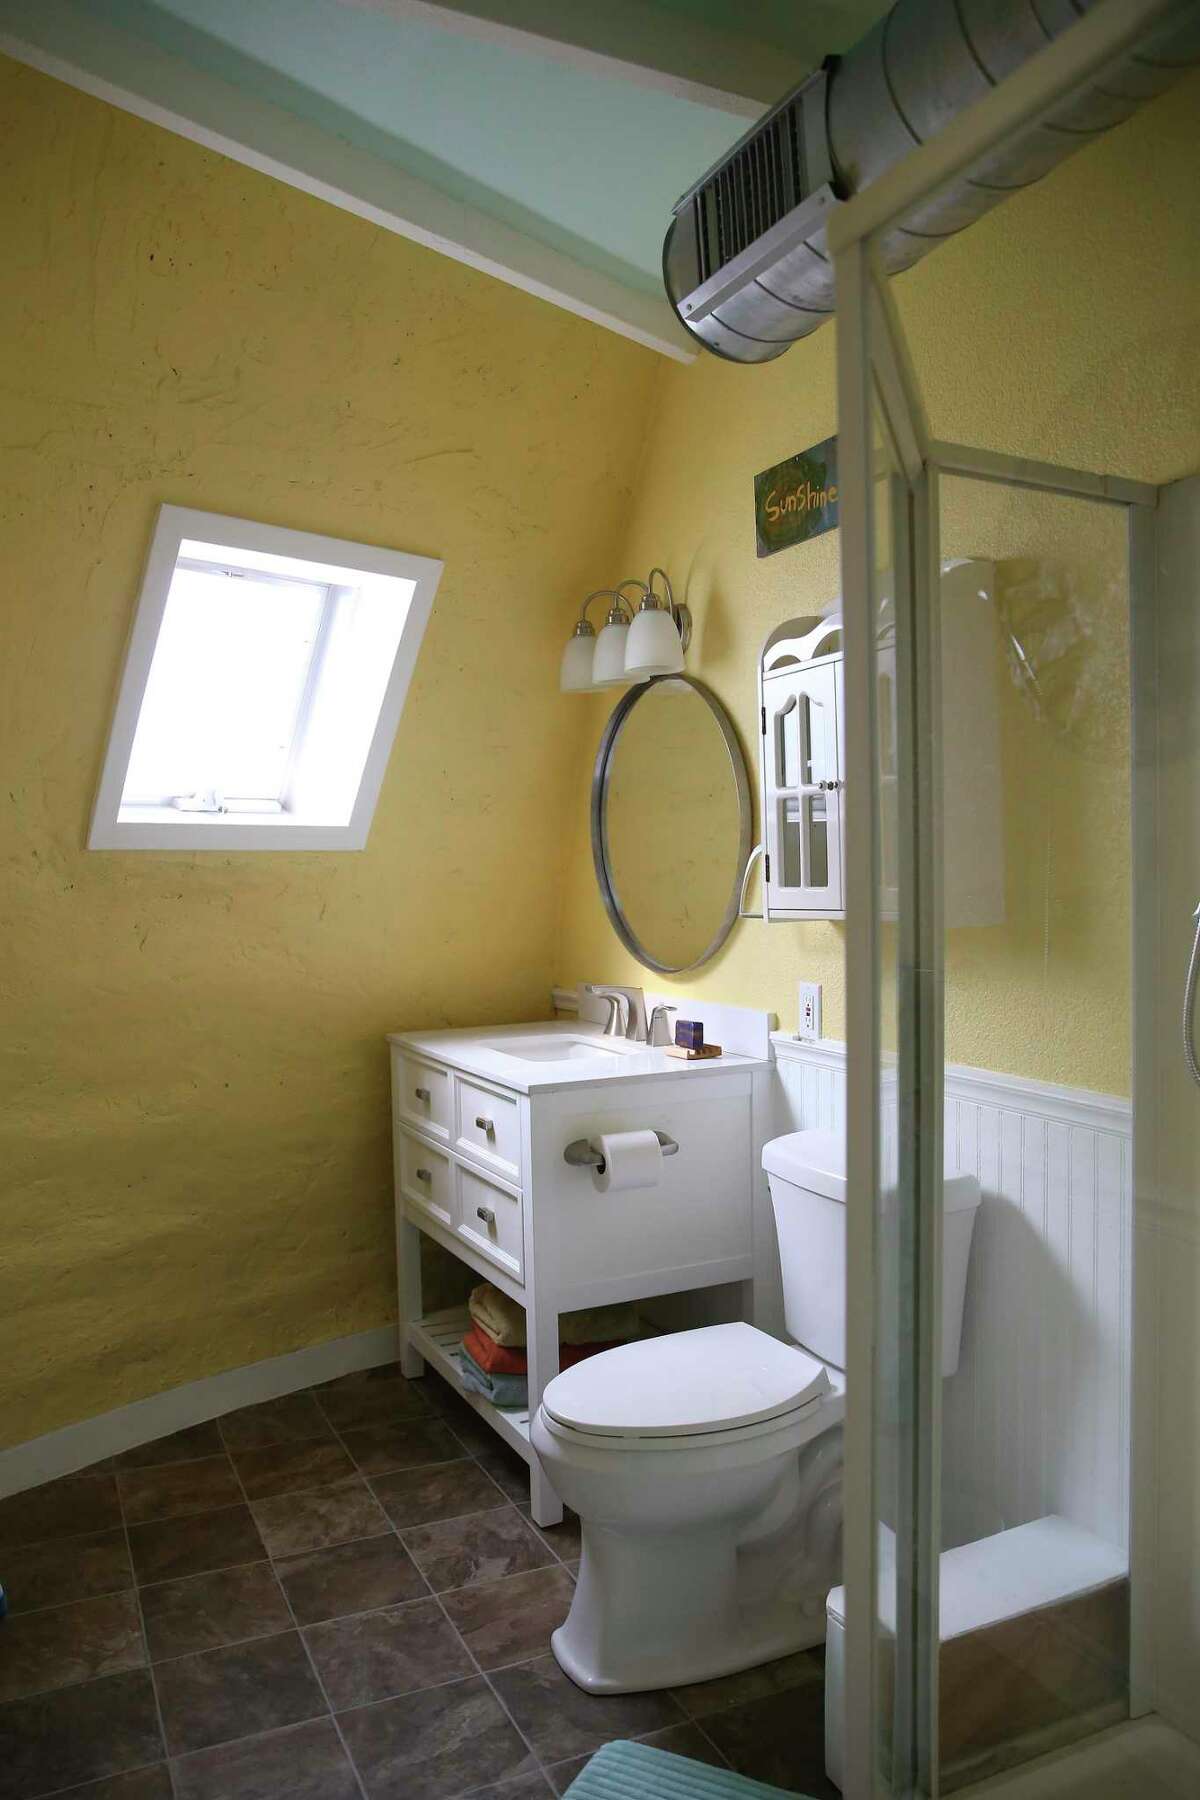 A view of a downstairs bathroom shows how the exterior walls curve inward as they rise up.